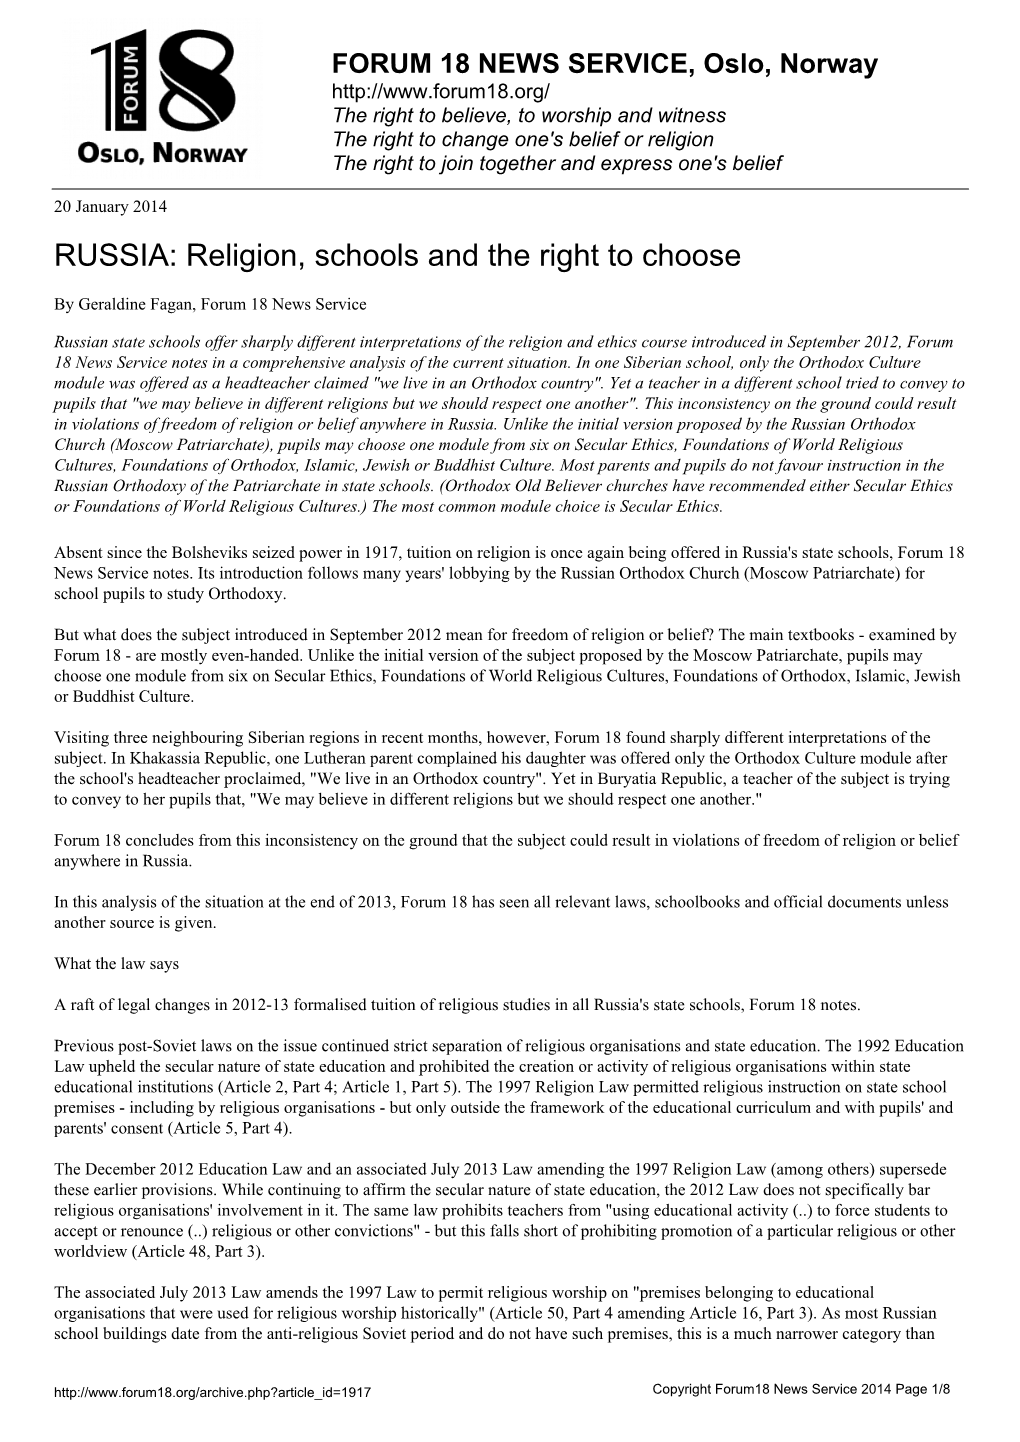 Religion, Schools and the Right to Choose